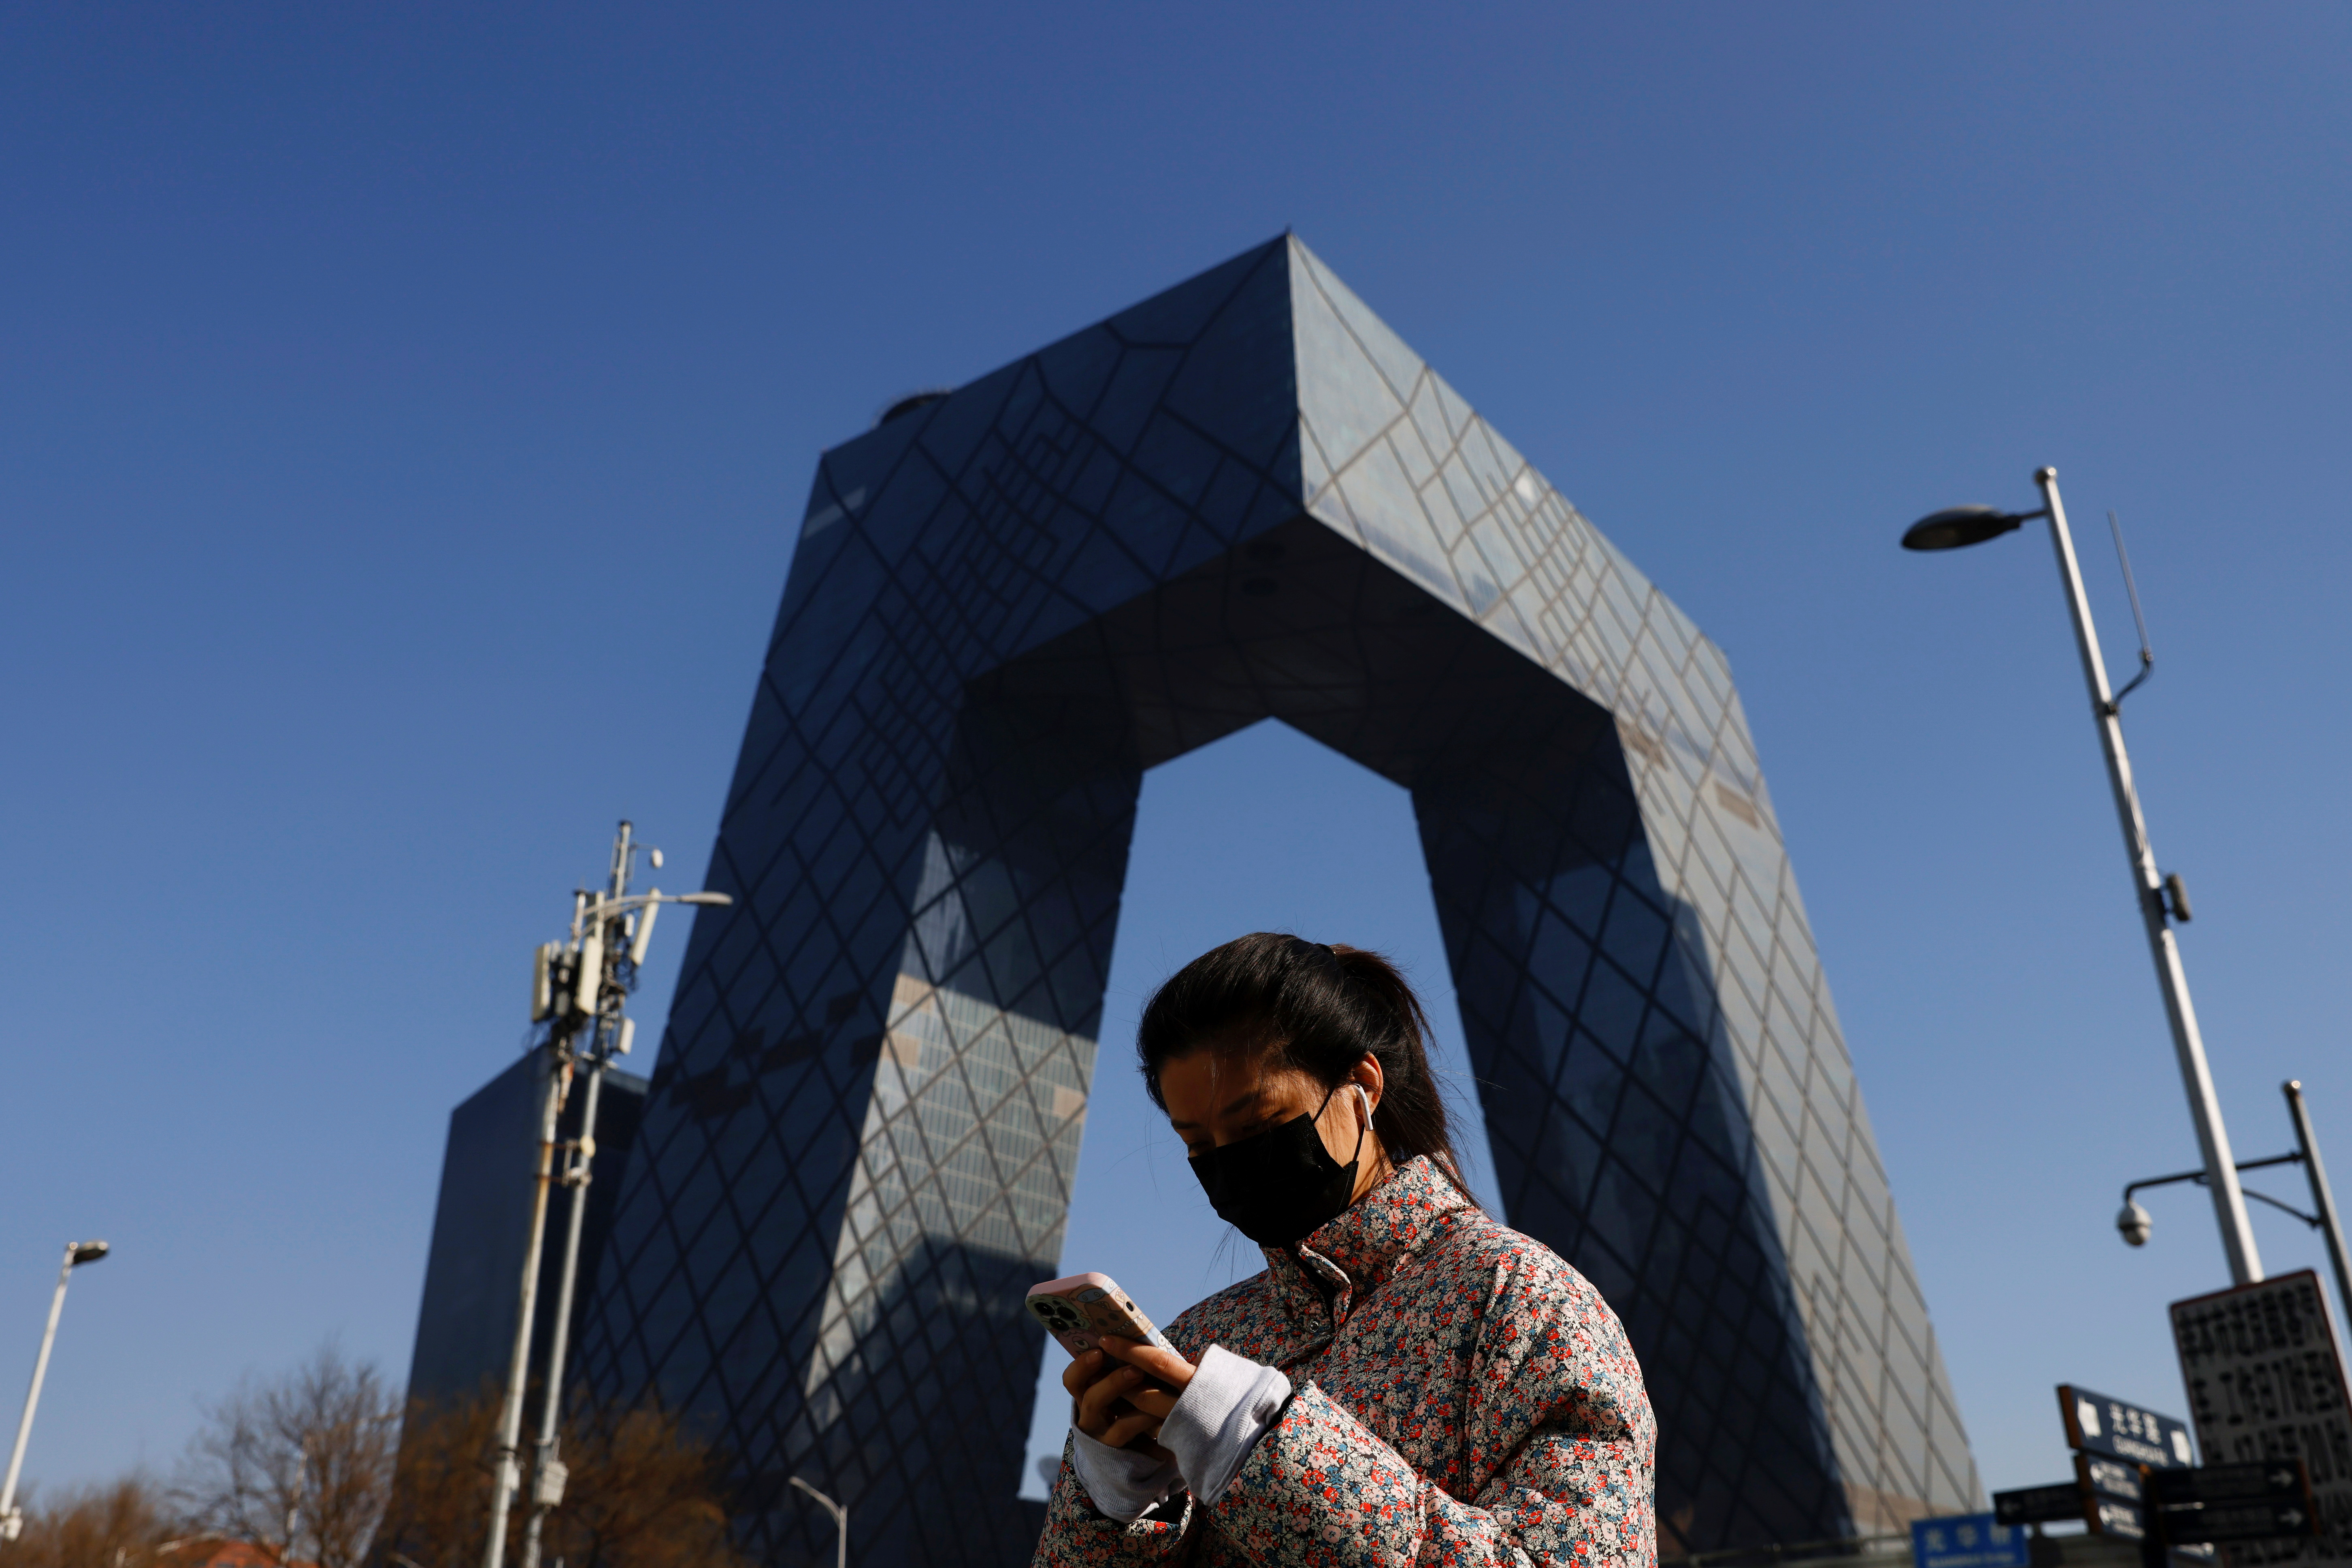 A woman holding a mobile phone walks past the CCTV headquarters, the home of Chinese state media outlet CCTV and its English-language sister channel CGTN, in Beijing, China February 5, 2021. REUTERS/Carlos Garcia Rawlins